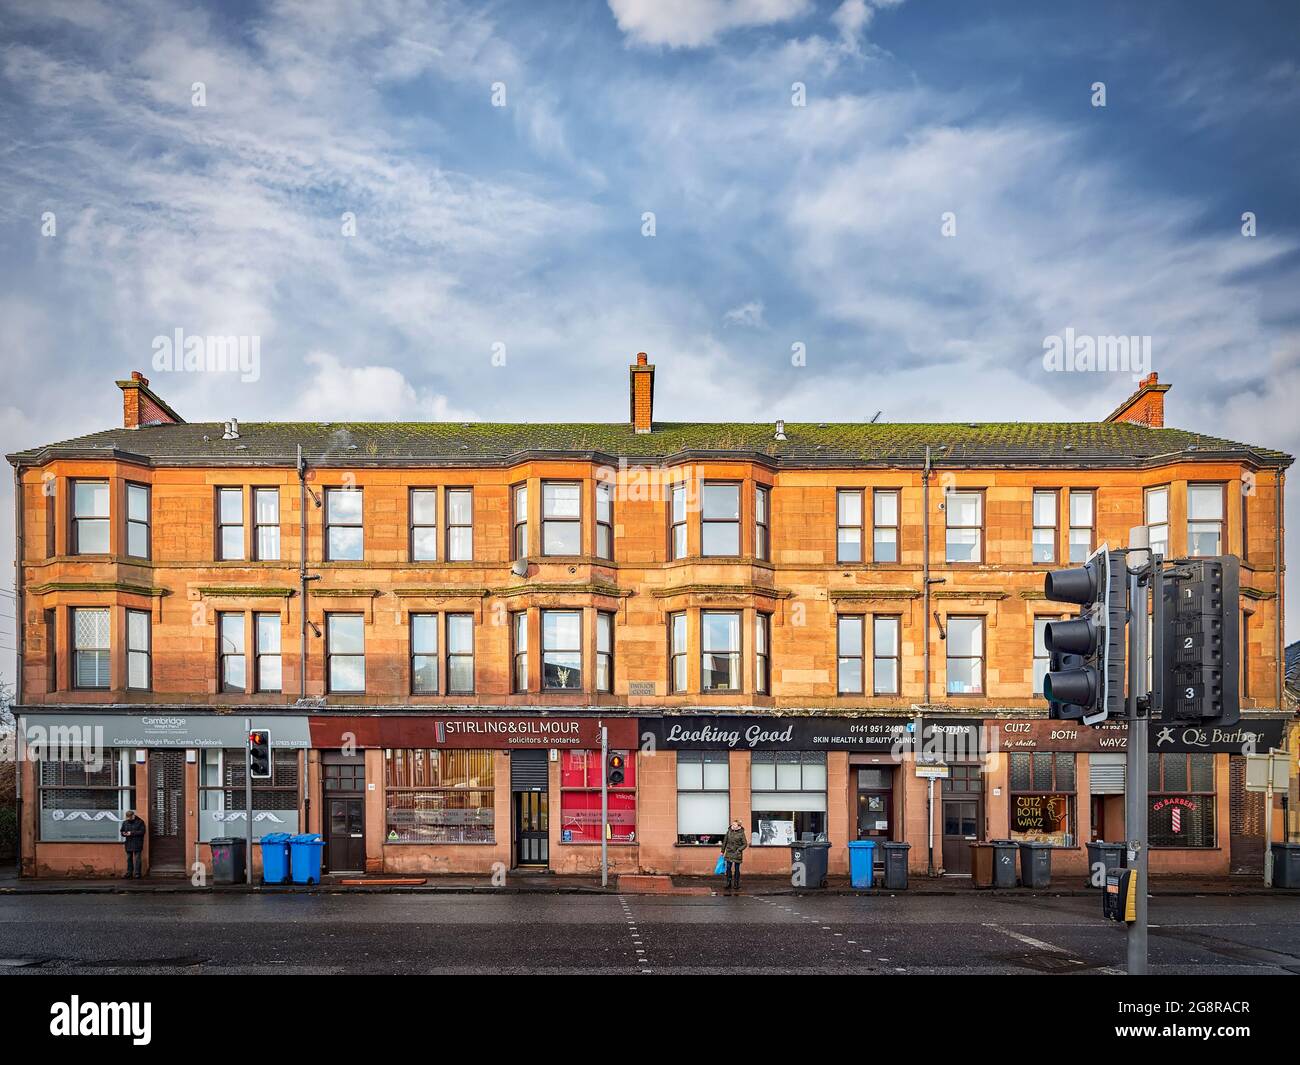 CLYDEBANK, SCOTLAND - FEBRUARY 10, 2014: A typical red sandstone tenement block in the Clydebank area to the west of the city Glasgow. Stock Photo